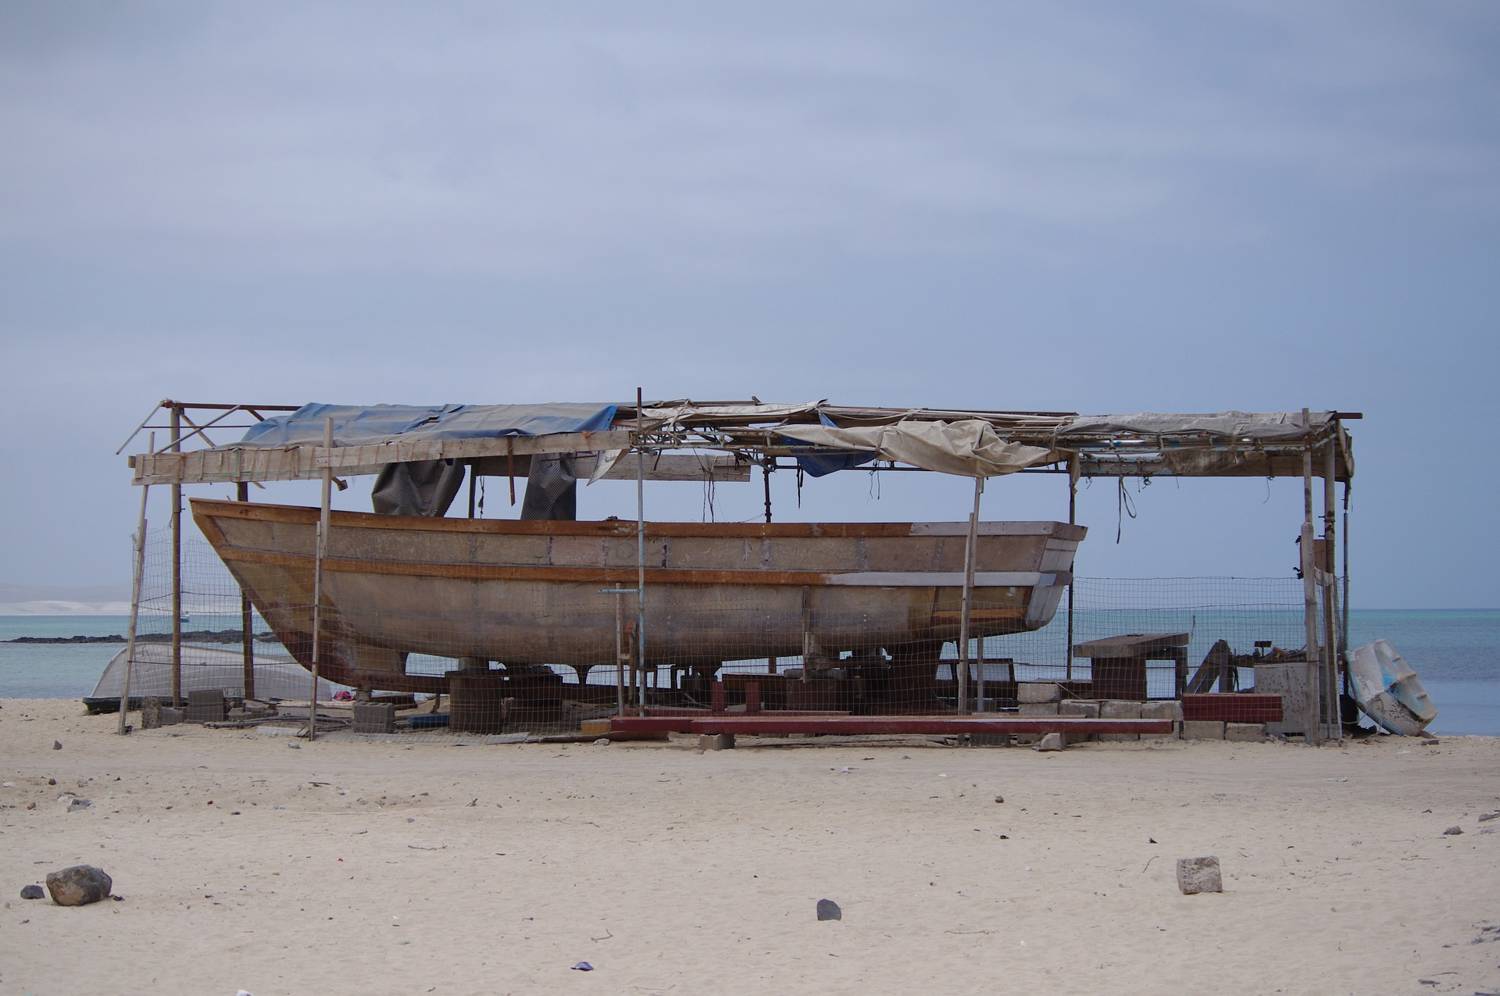 An unfinished boat in Boa Vista, Cape Verde. Photo: Pexels. By svatoplukvit0, free for use.